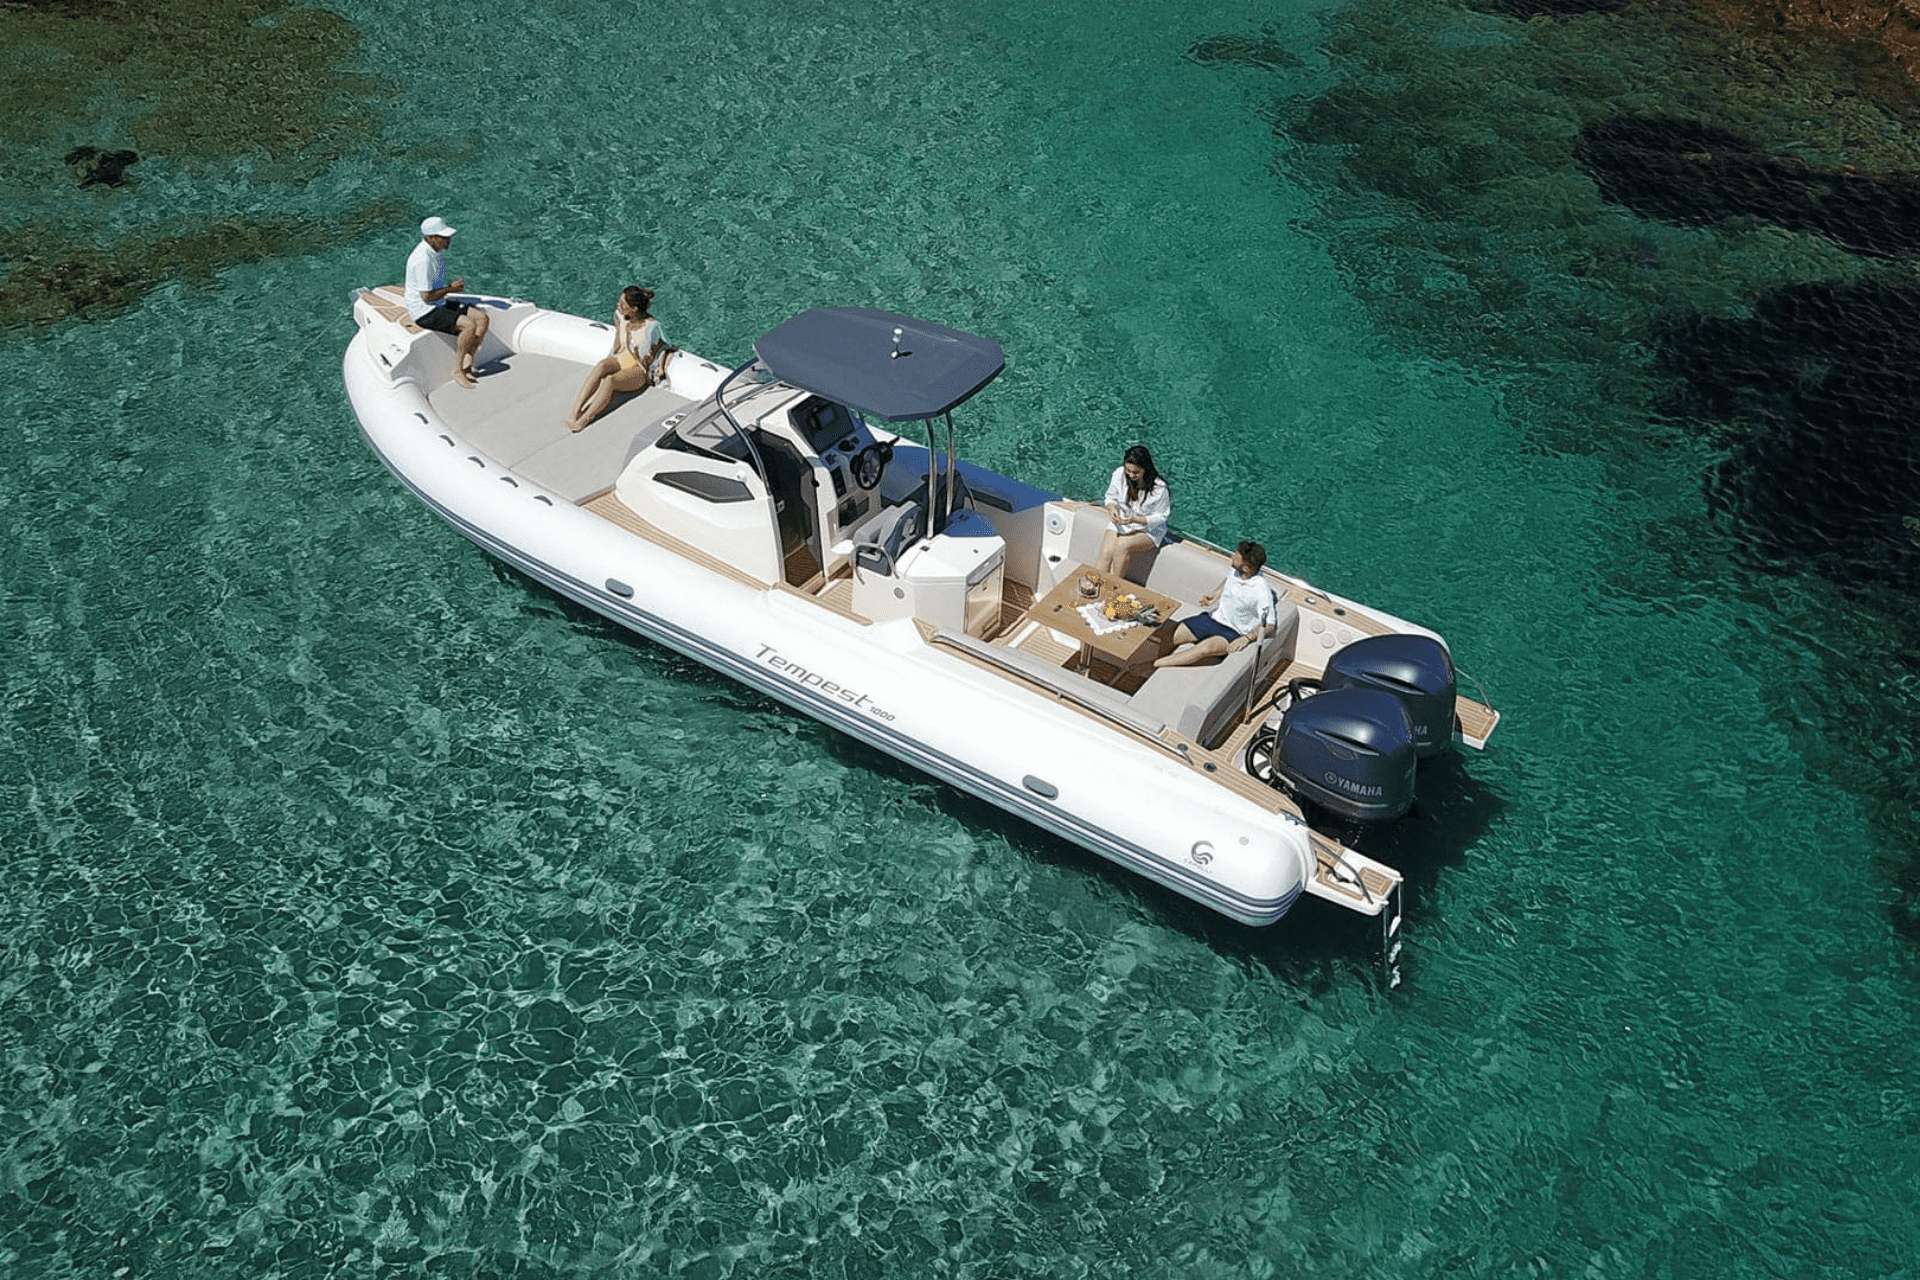 Tempest 1000 - Yacht Charter Cogolin & Boat hire in France French Riviera St. Tropez Saint Tropez 1